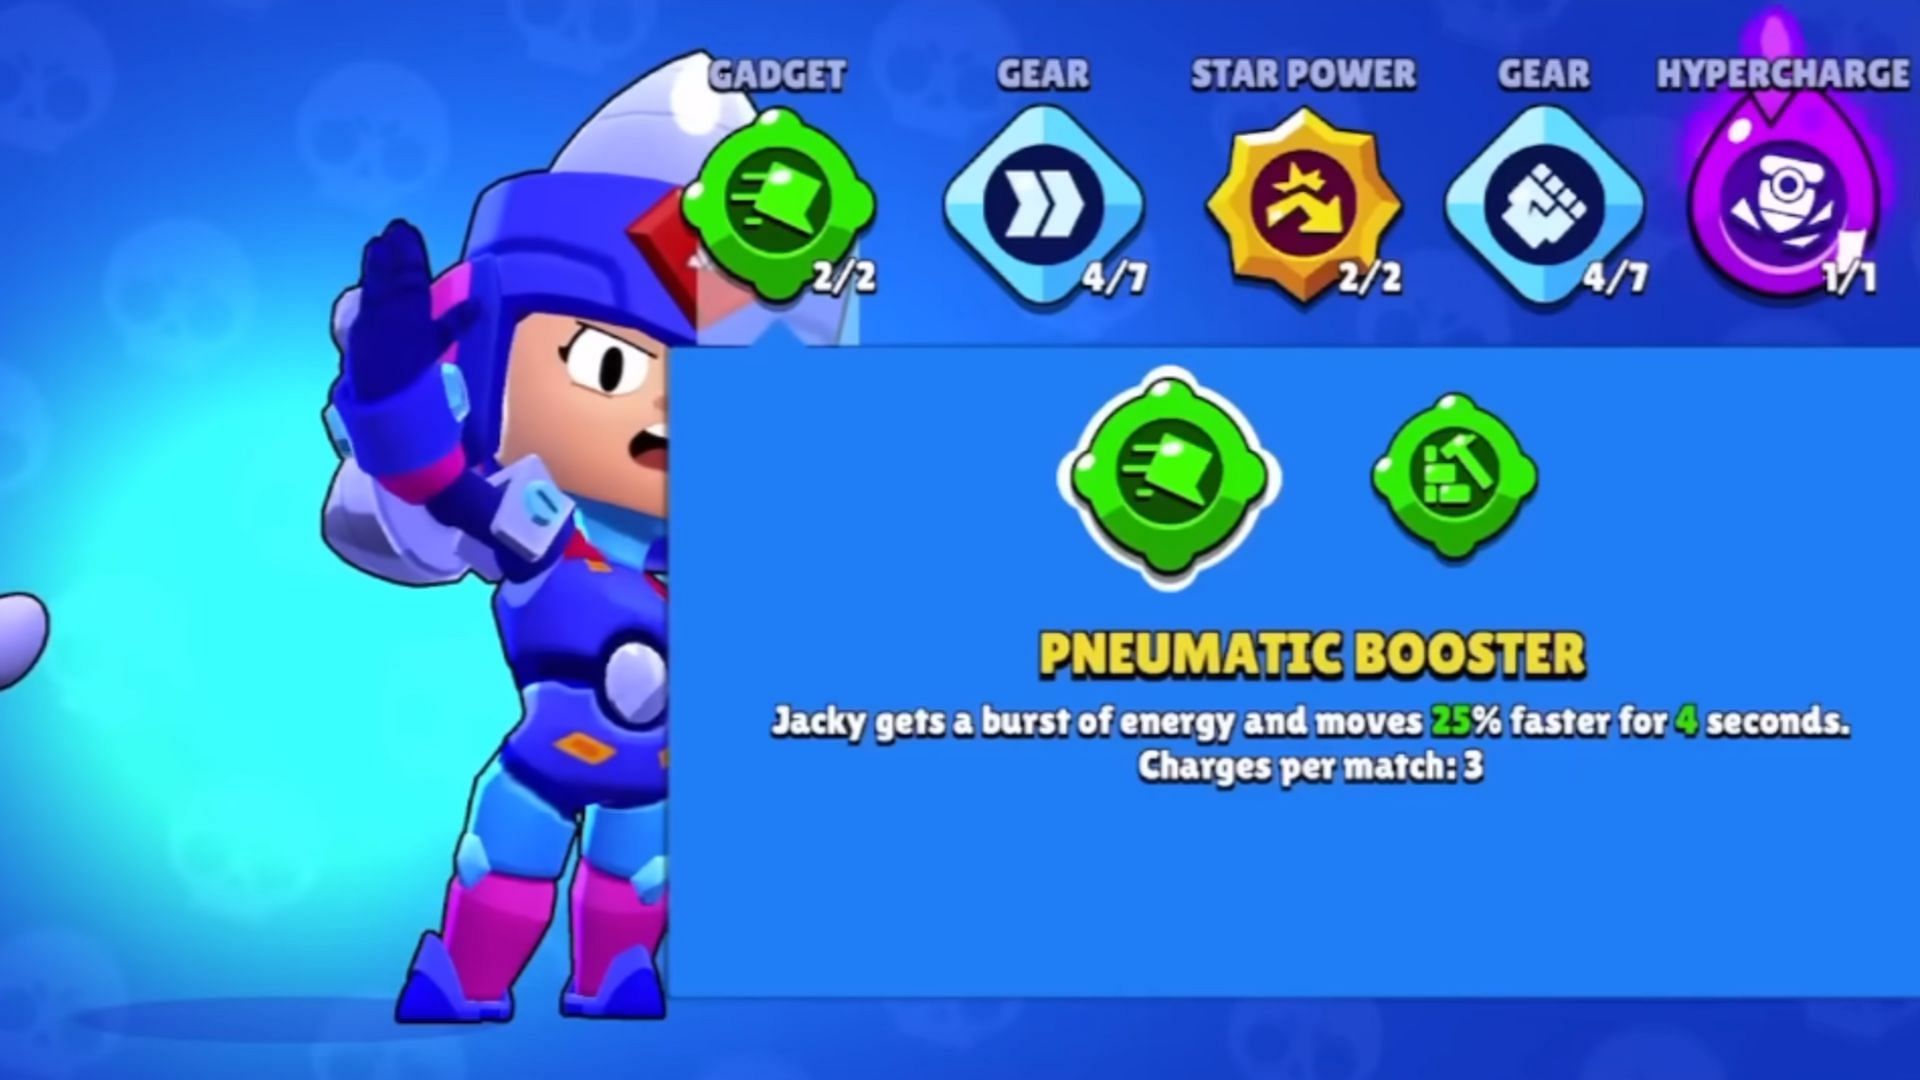 Pneumatic Booster Gadget (Image via Supercell)